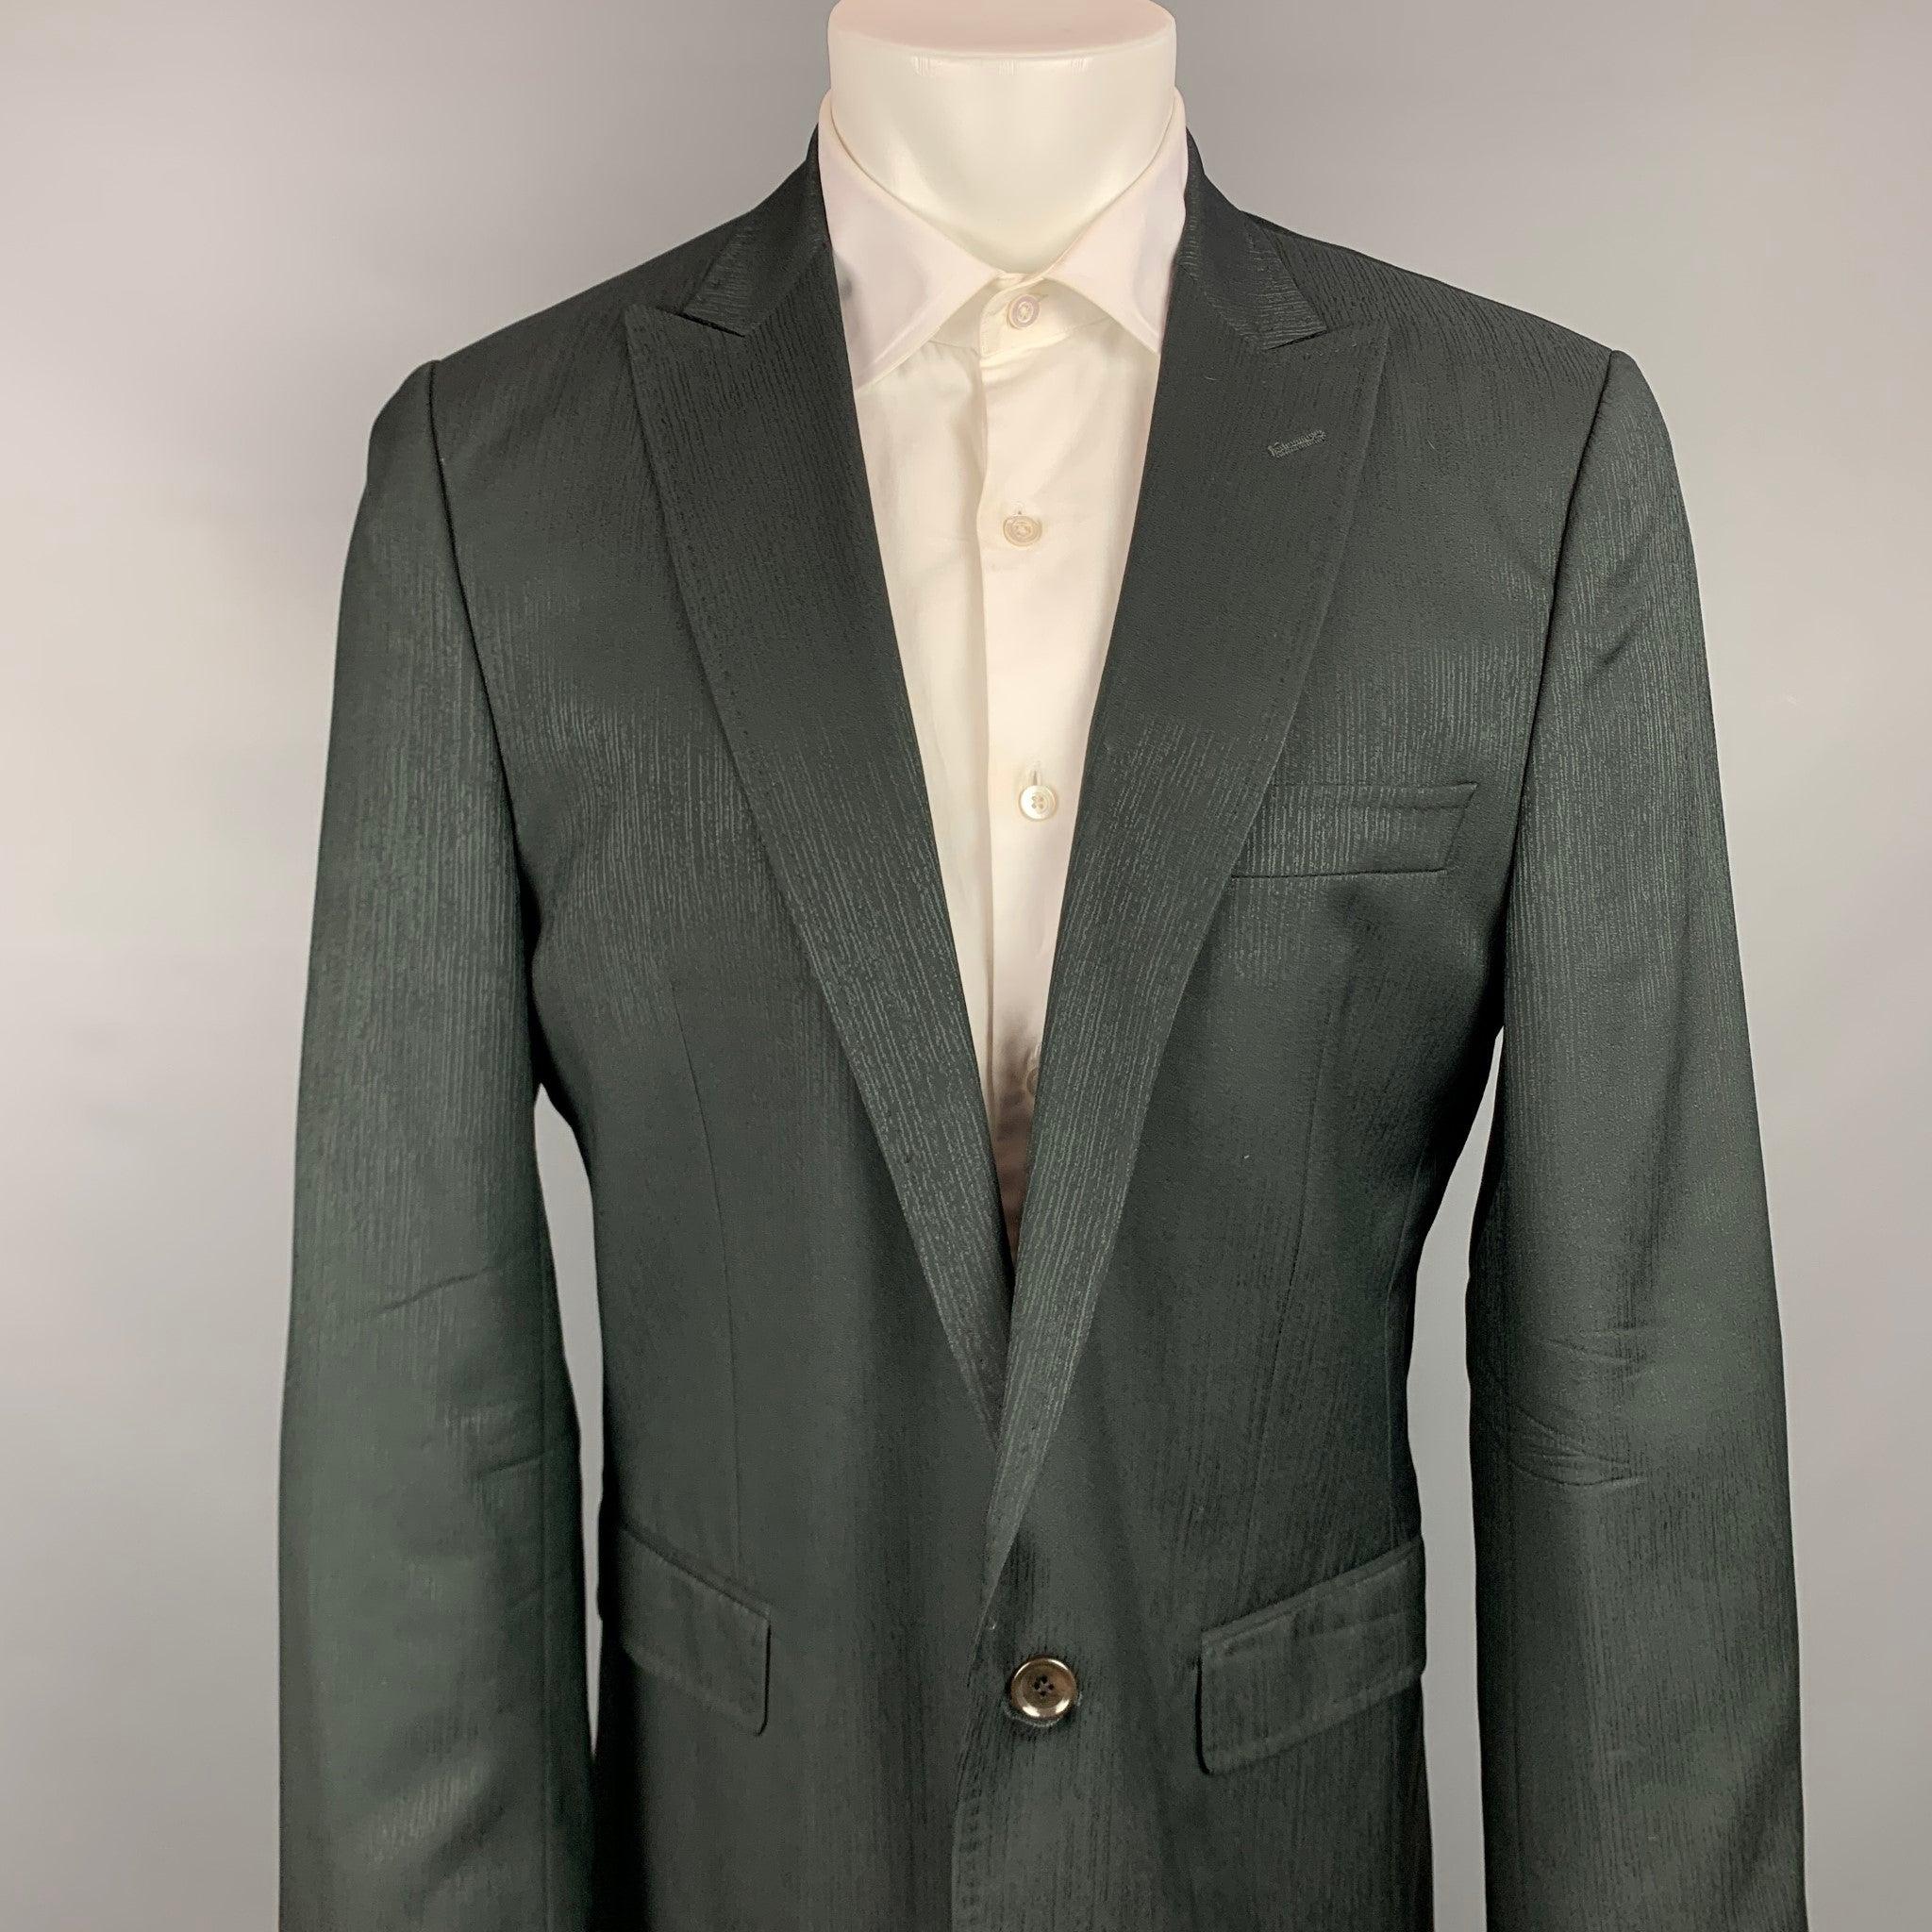 DOLCE & GABBANA sport coat comes in a black wool / viscose with a full liner featuring a peak lapel, flap pockets, and a single button closure. Made in Italy.Very Good
Pre-Owned Condition. 

Marked:   IT 52 

Measurements: 
 
Shoulder: 18 inches 